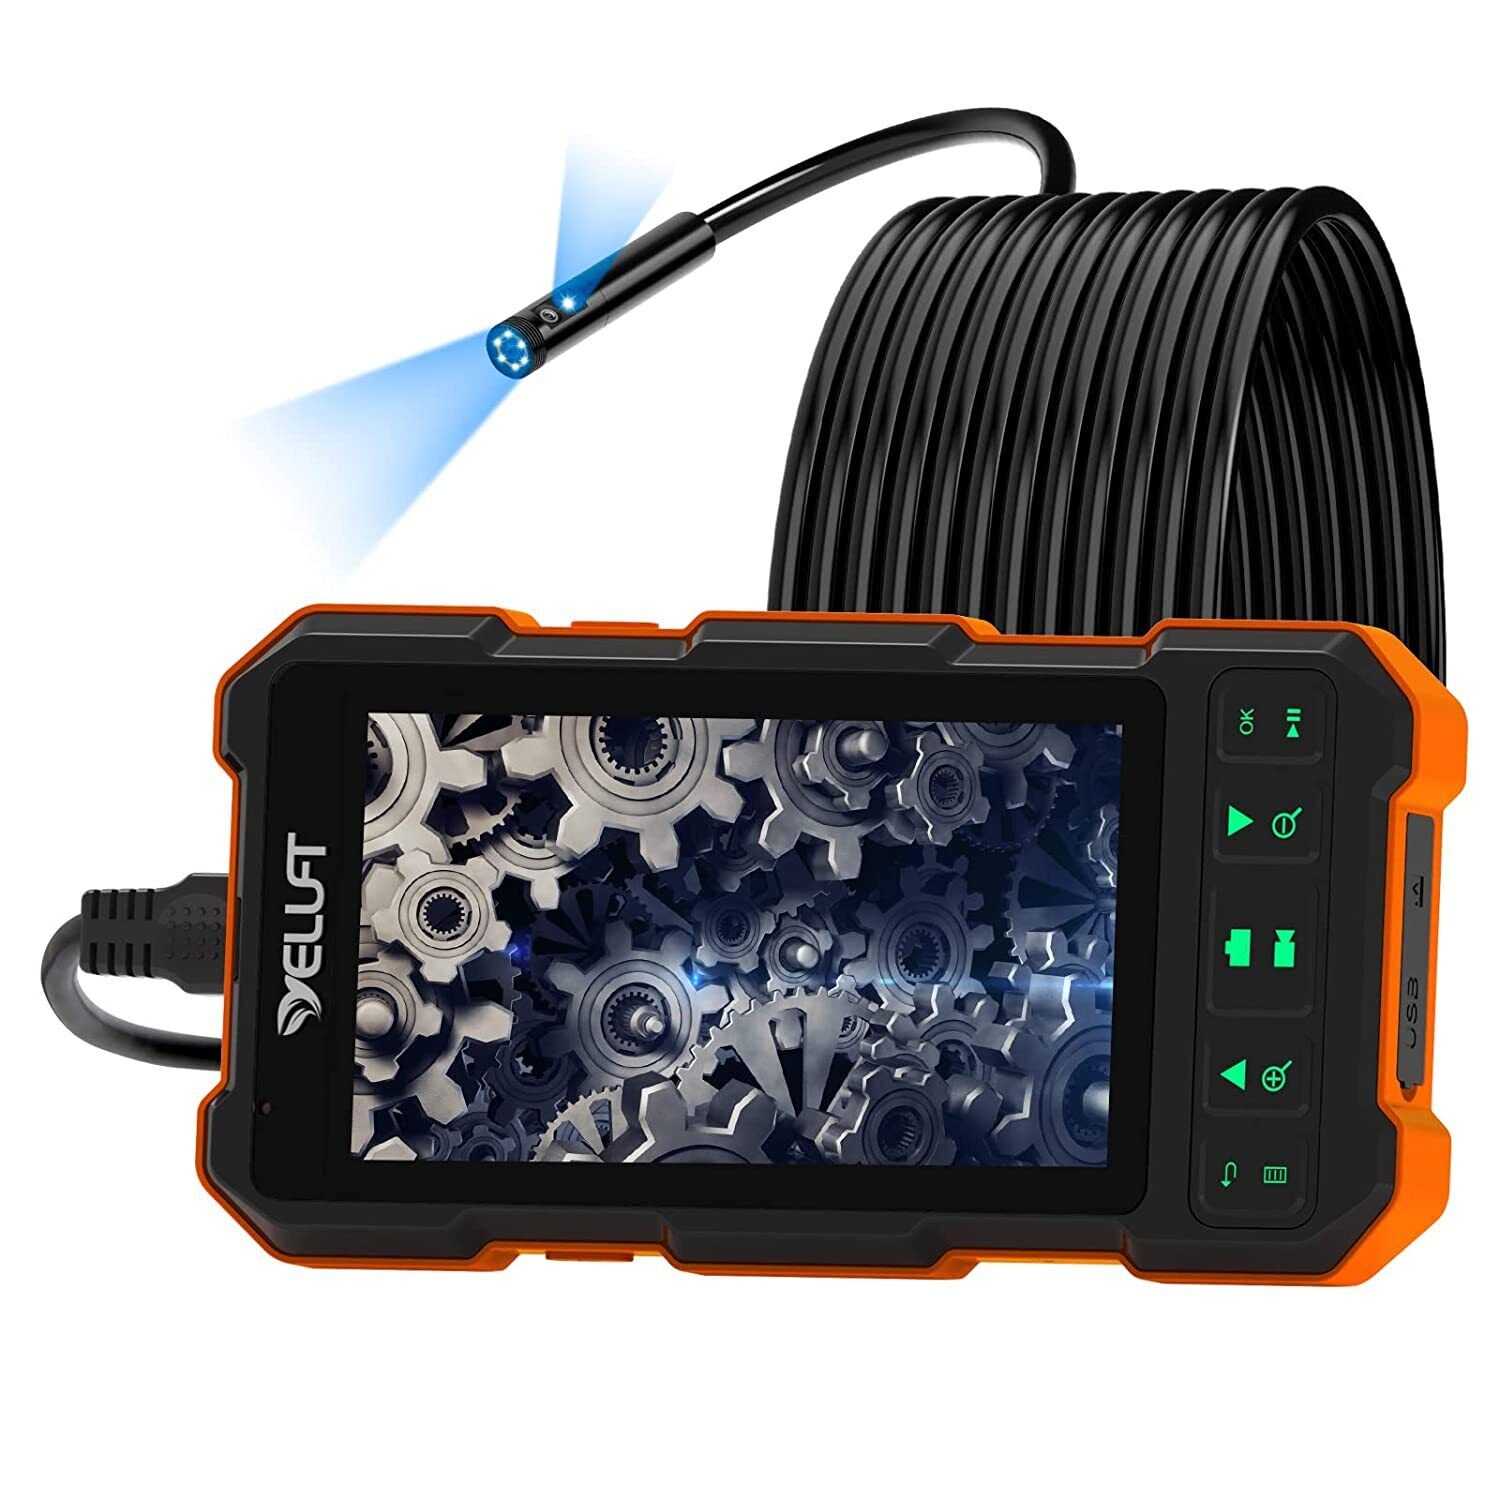 Waterproof 1080P Pipe Inspection Camera Endoscope Video Sewer Drain Cleaner USB